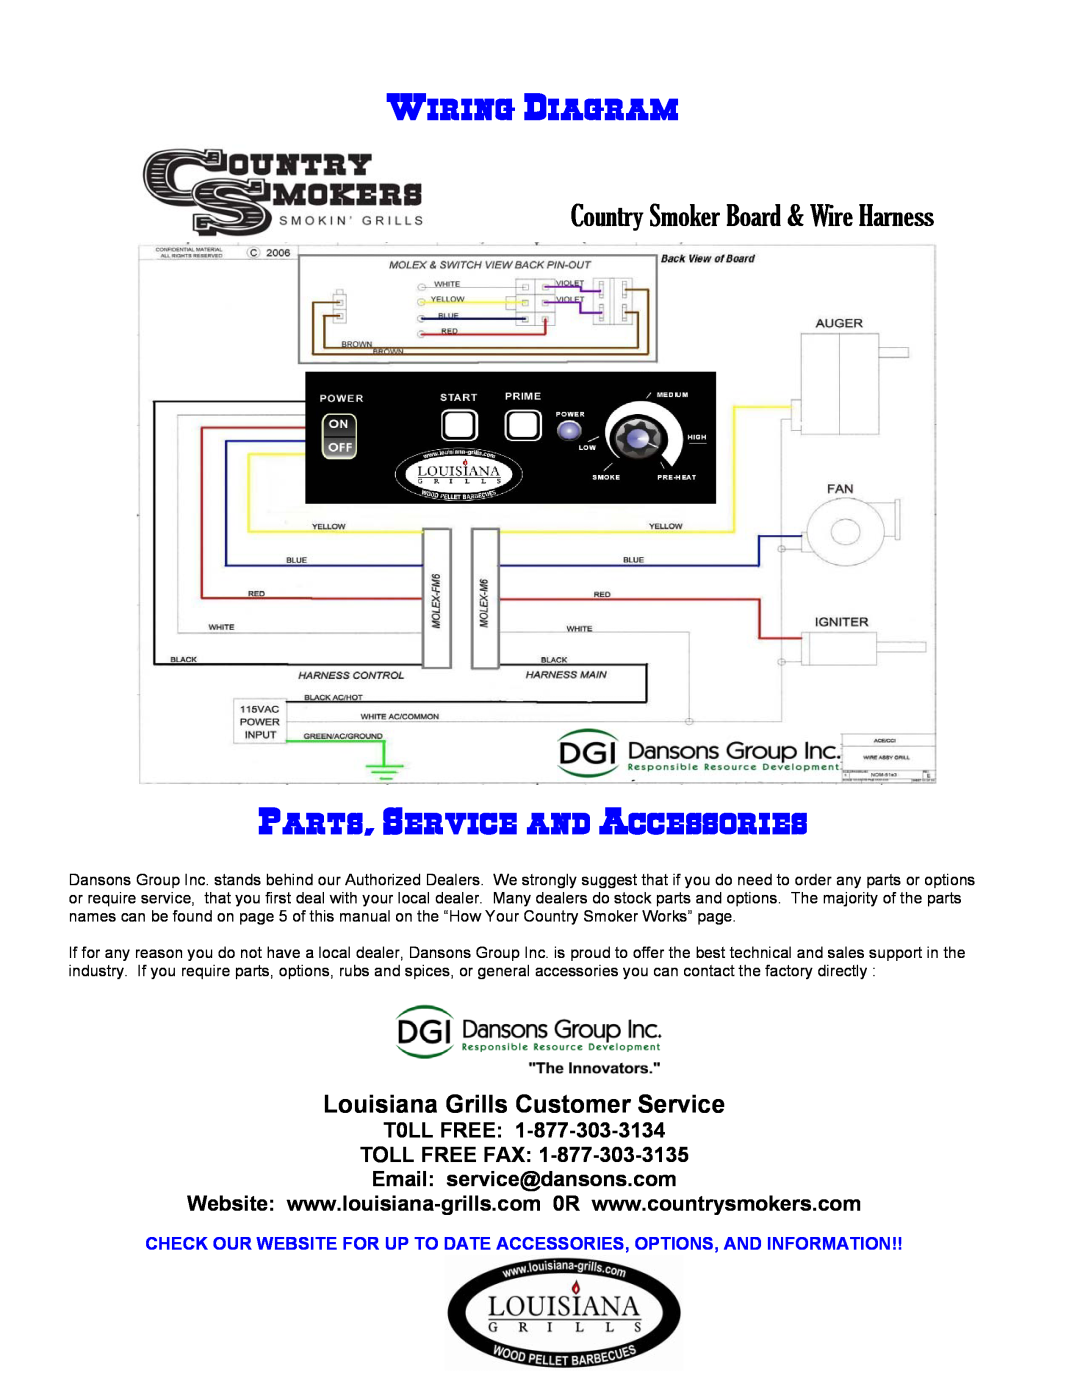 Dansons Group 1050, 680, TAILGATER, 570 Louisiana Grills Customer Service, Wiring Diagram, Parts, Service And Accessories 